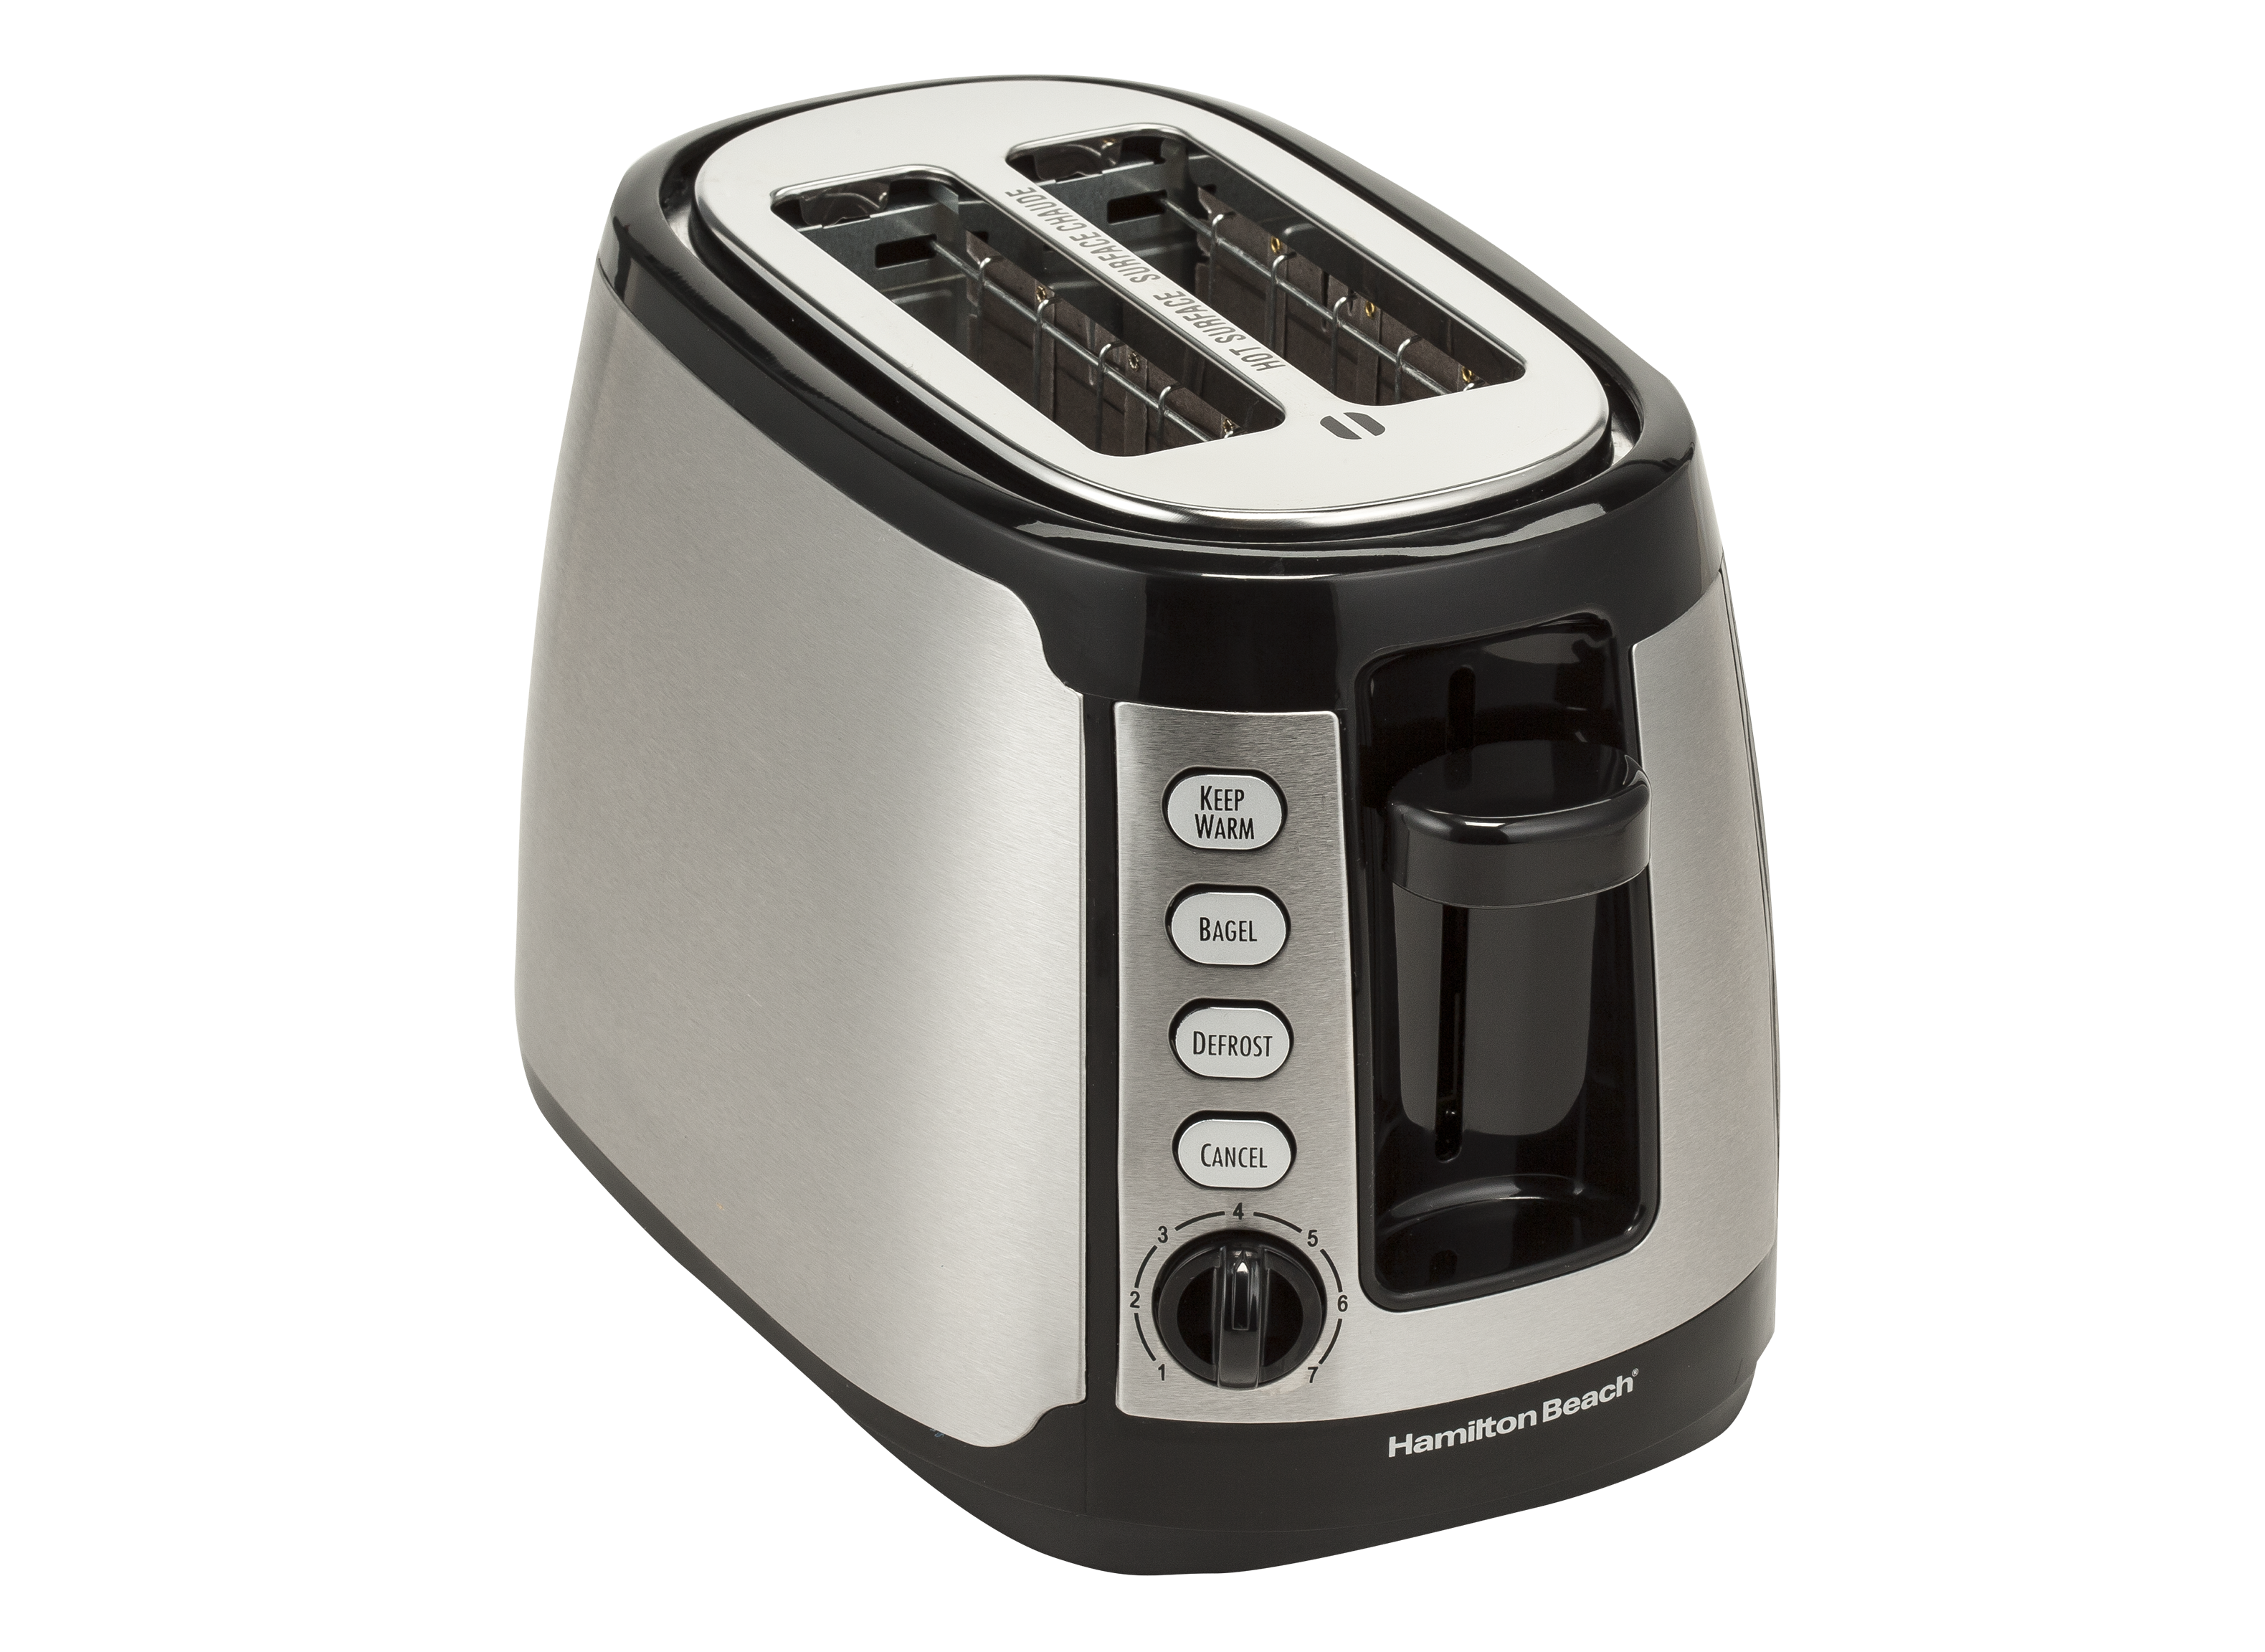 https://crdms.images.consumerreports.org/prod/products/cr/models/285118-toasters-hamiltonbeach-keepwarm2slice22811.png